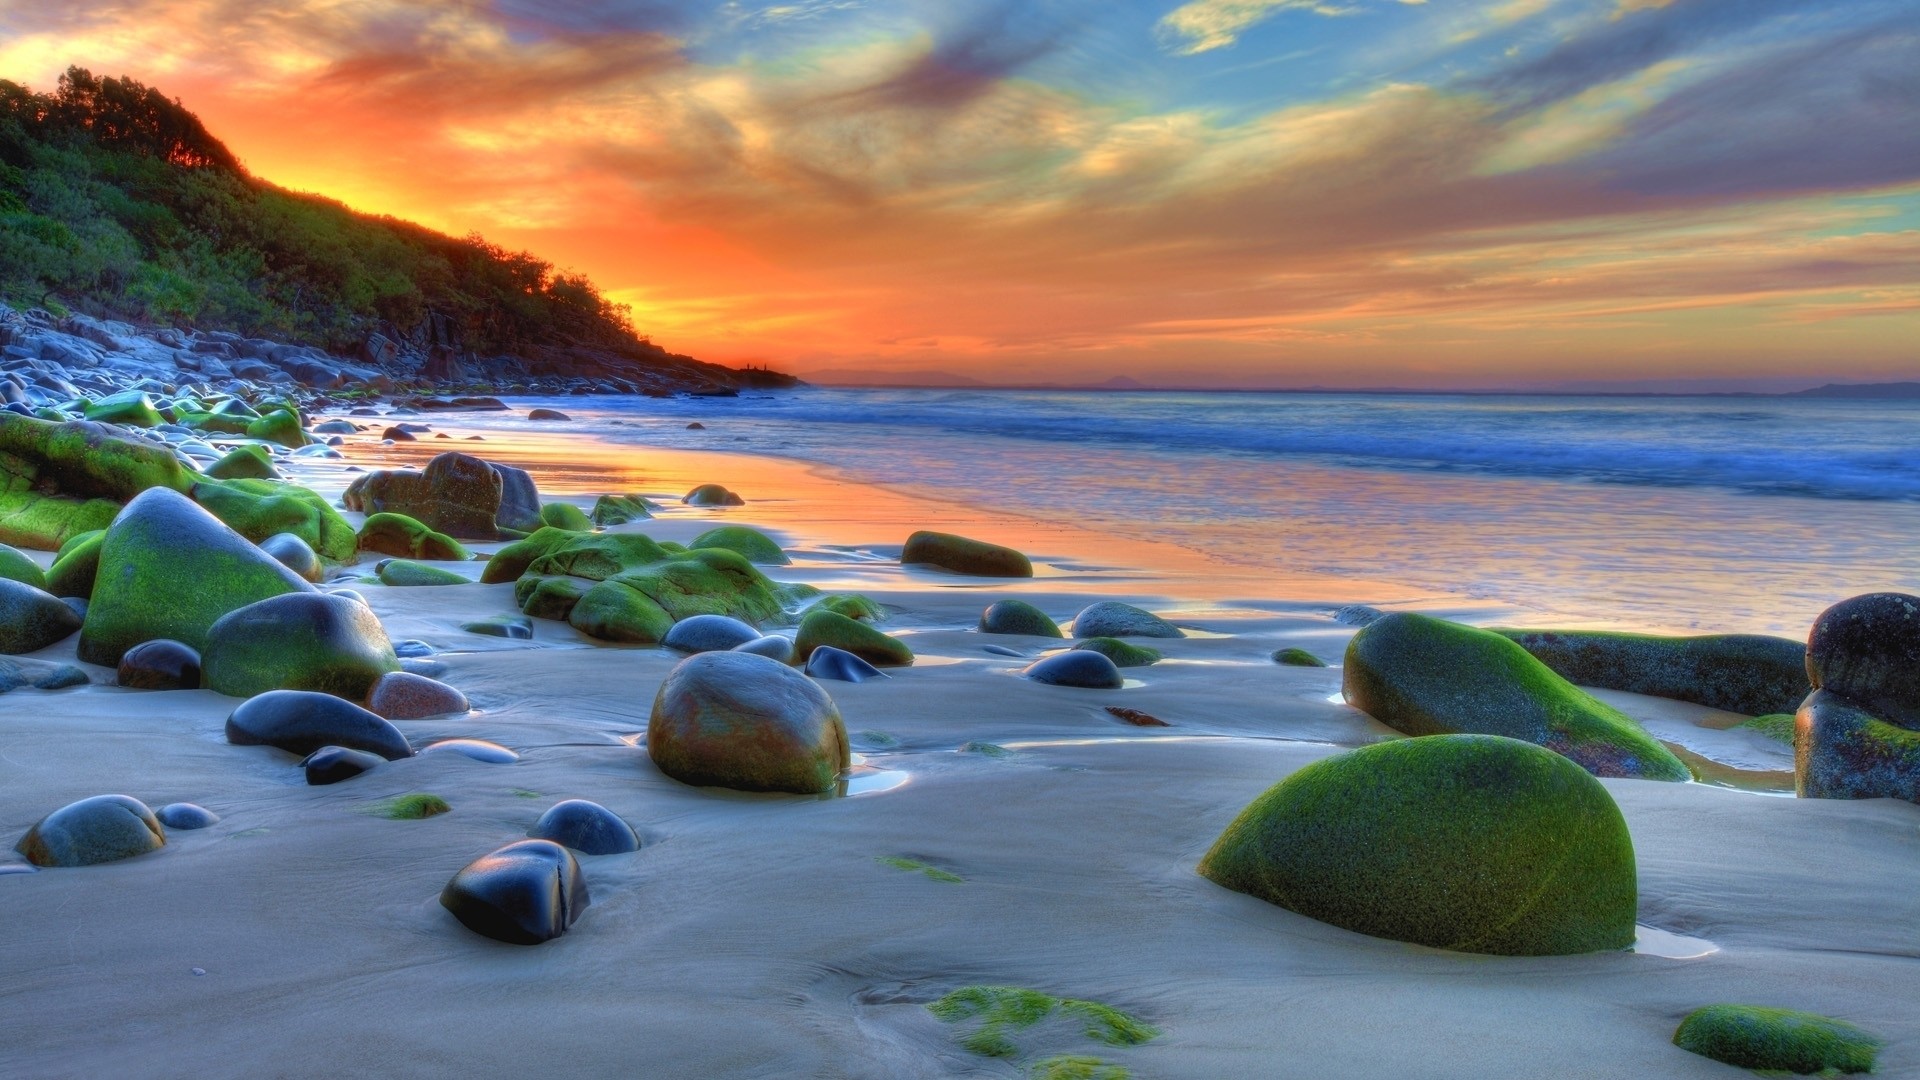 1920x1080 Download the following Wonderful HDR Beach Wallpaper 967 by clicking the  button positioned underneath the "